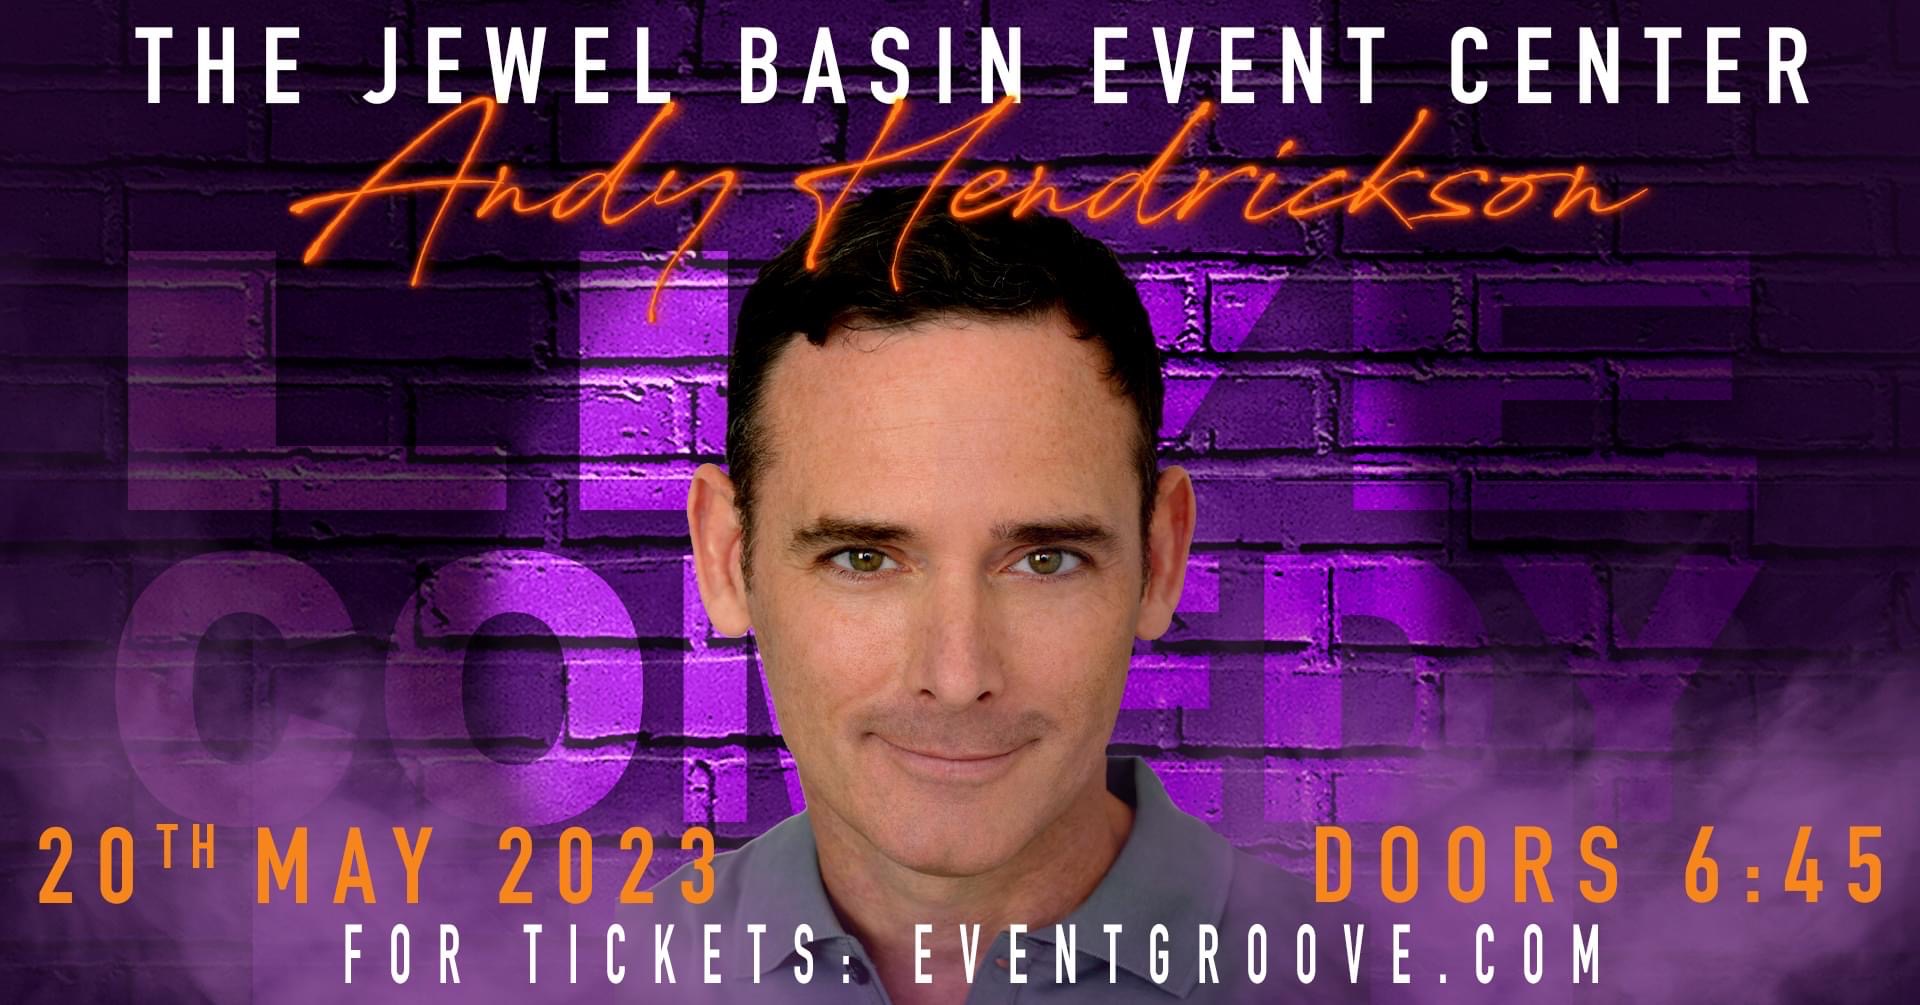 Comedian Andy Hendrickson at The Jewel Event Center in Bigfork, Montana on Saturday, May 20, 2023